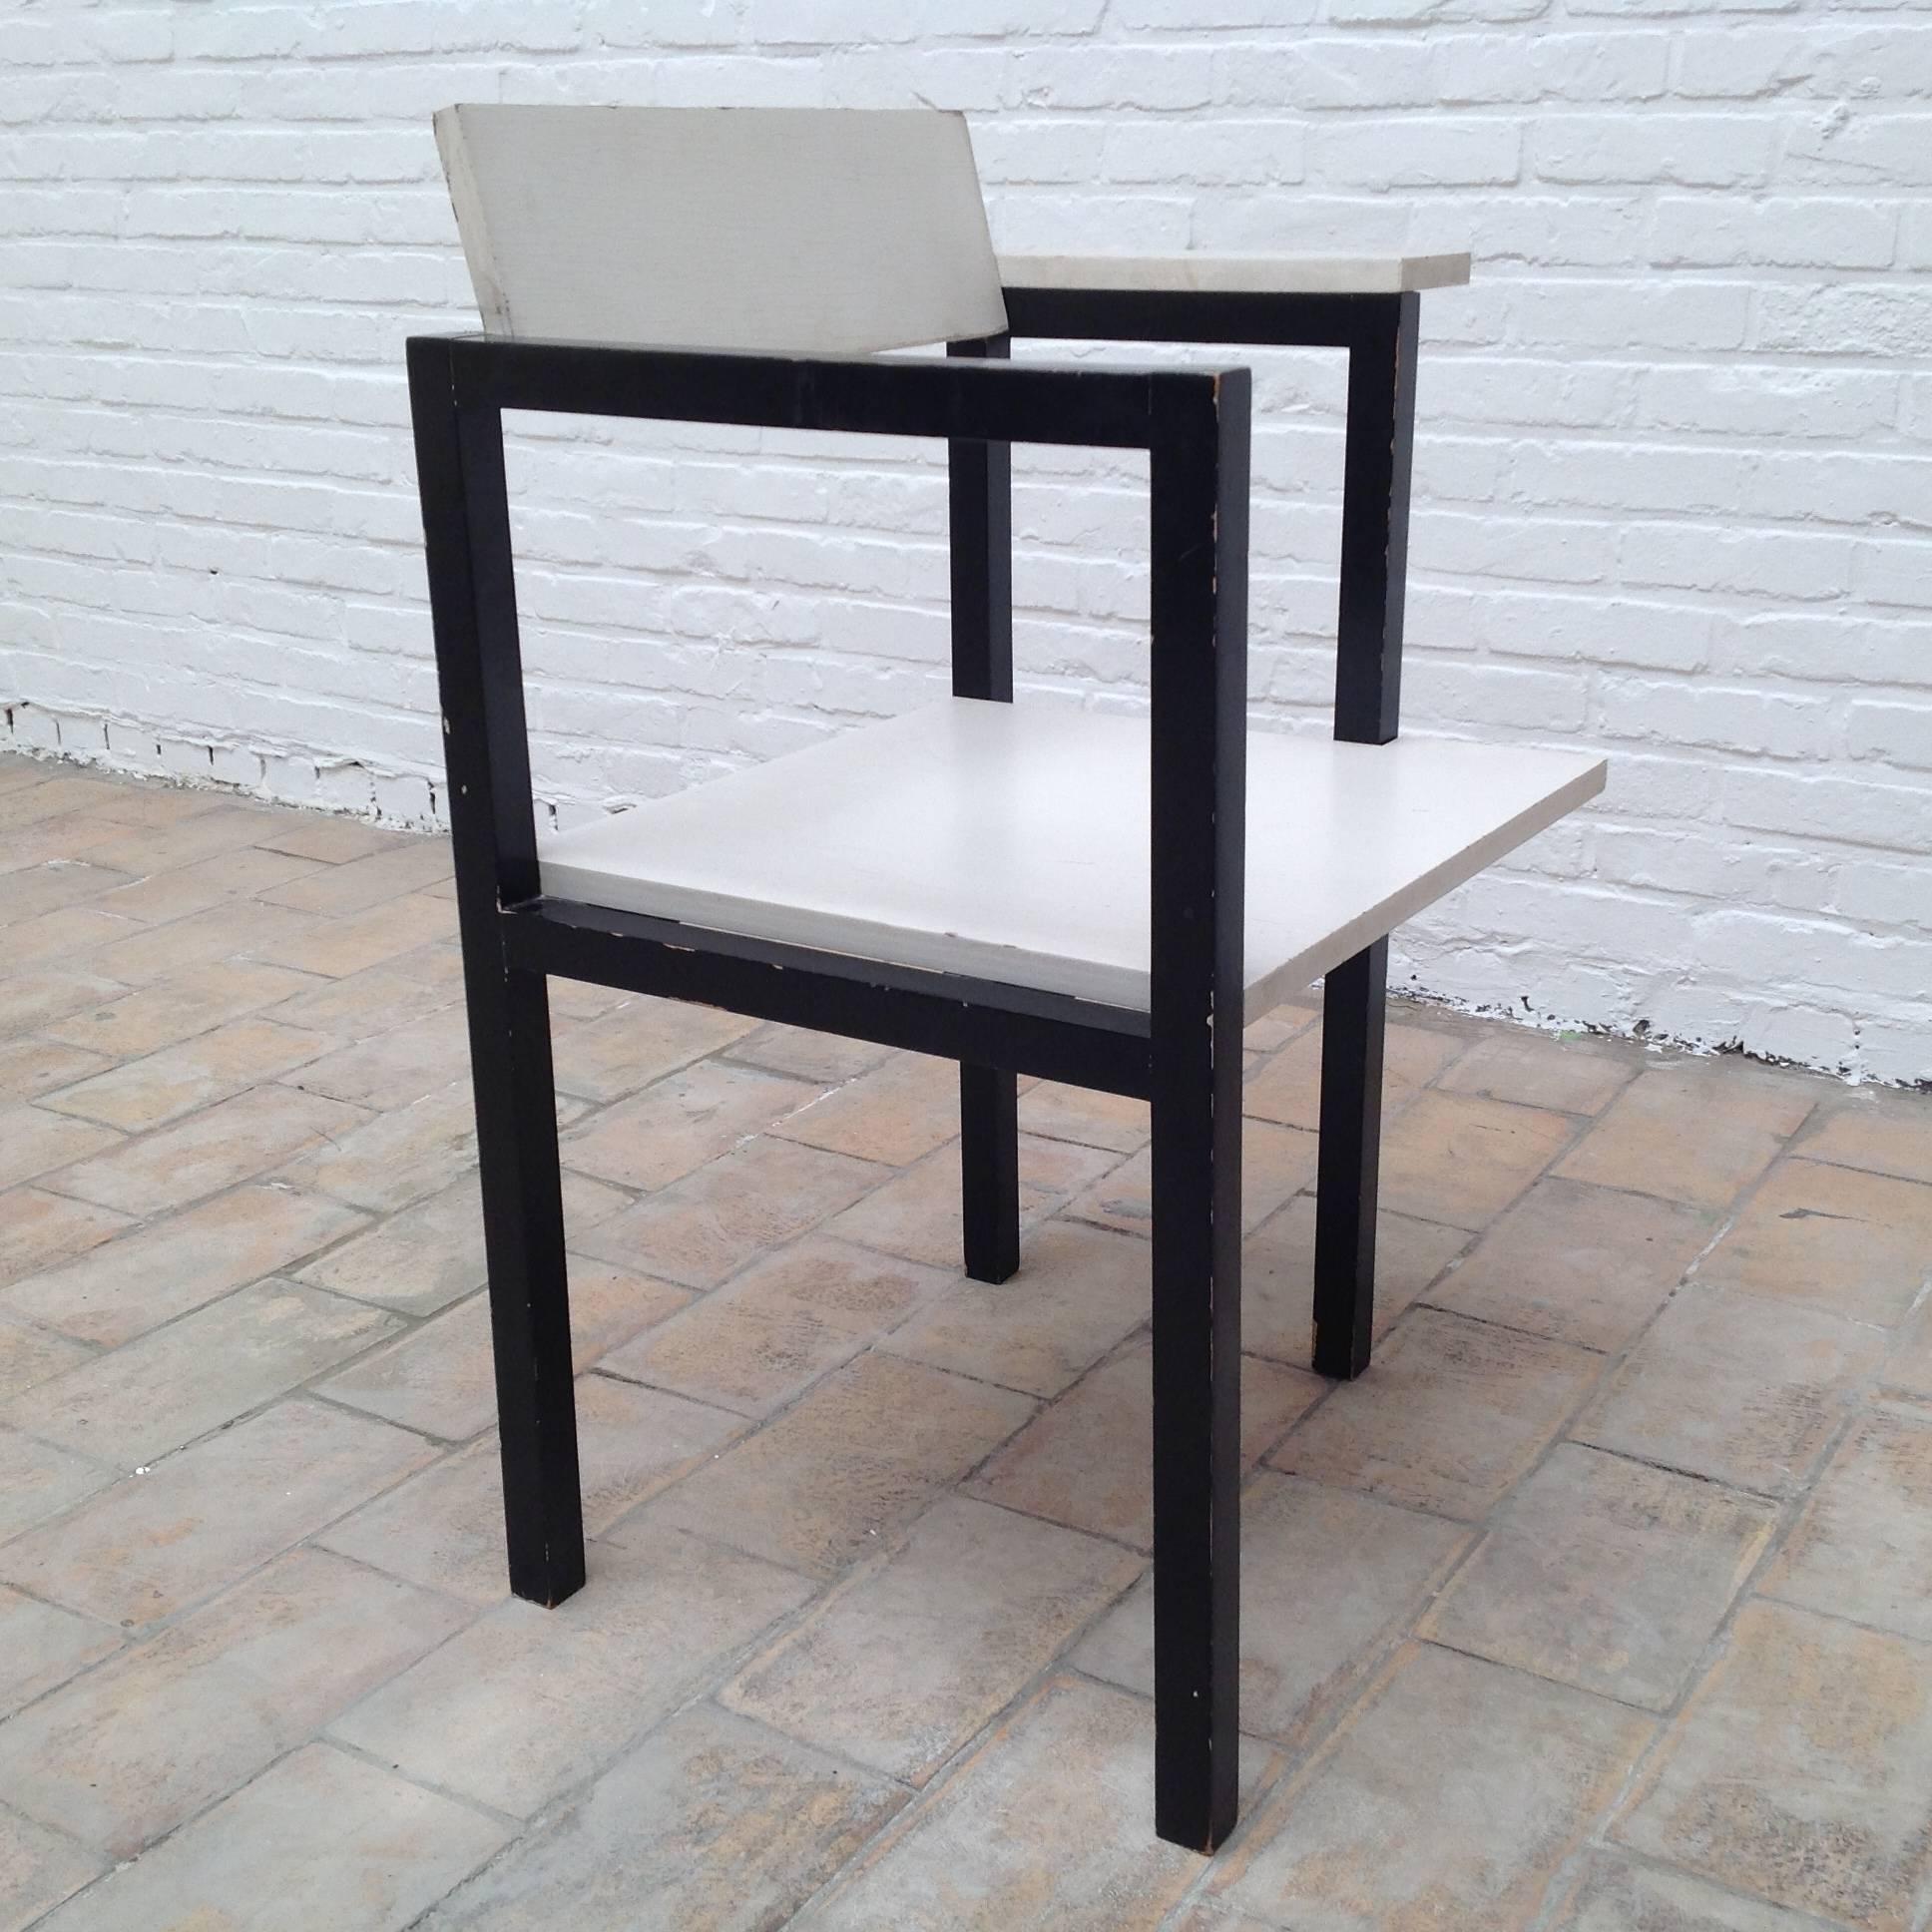 Very Rare and Unknown One-Off Chair by Gerrit Rietveld In Good Condition For Sale In Brussels, BE